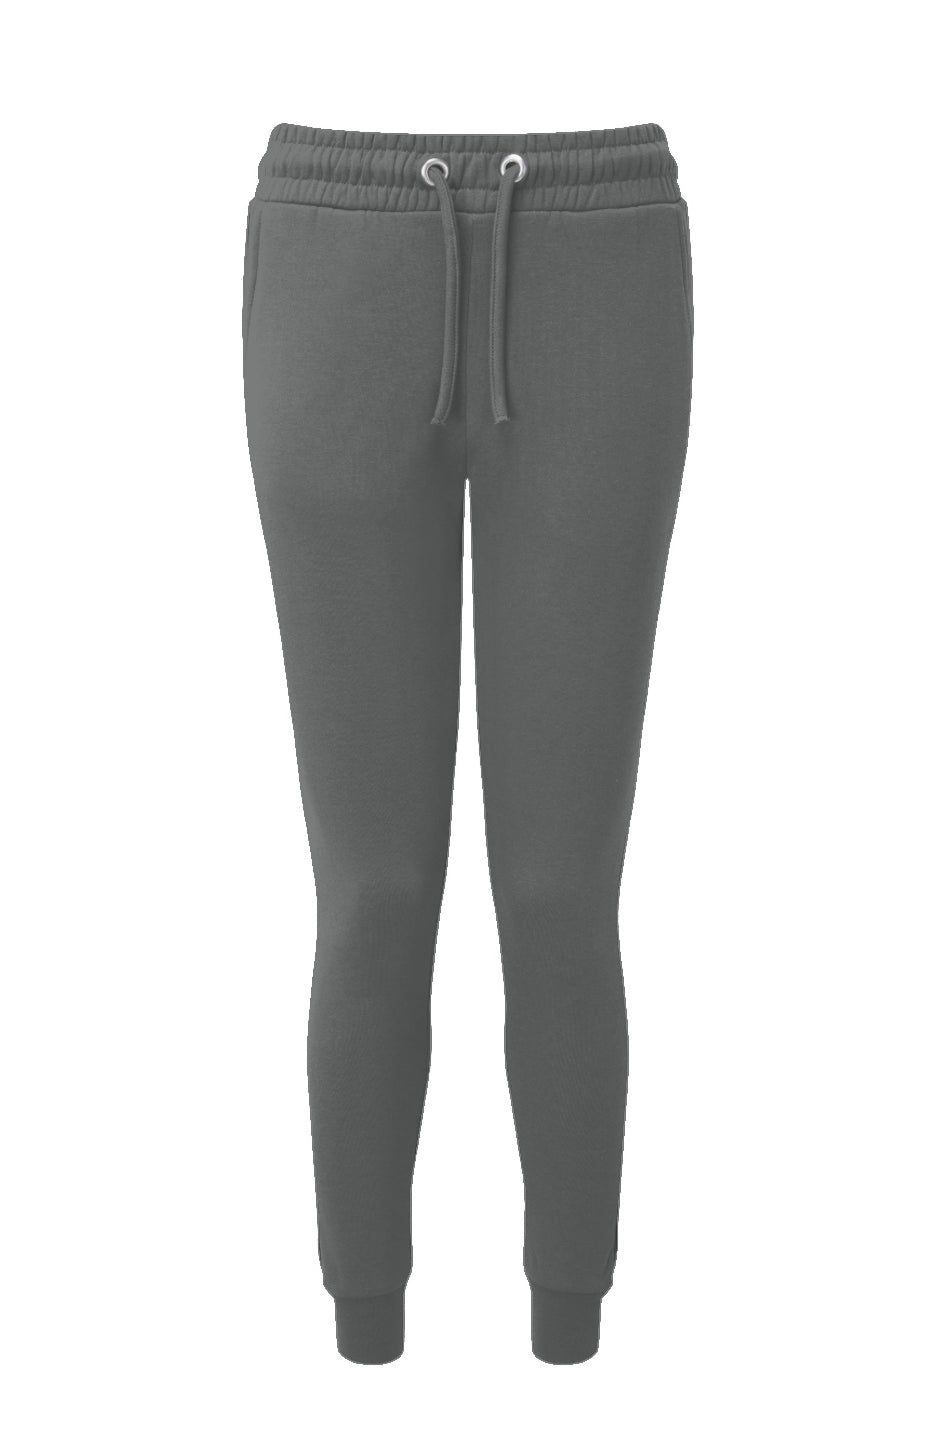 Athleisure Jogger - Charcoal